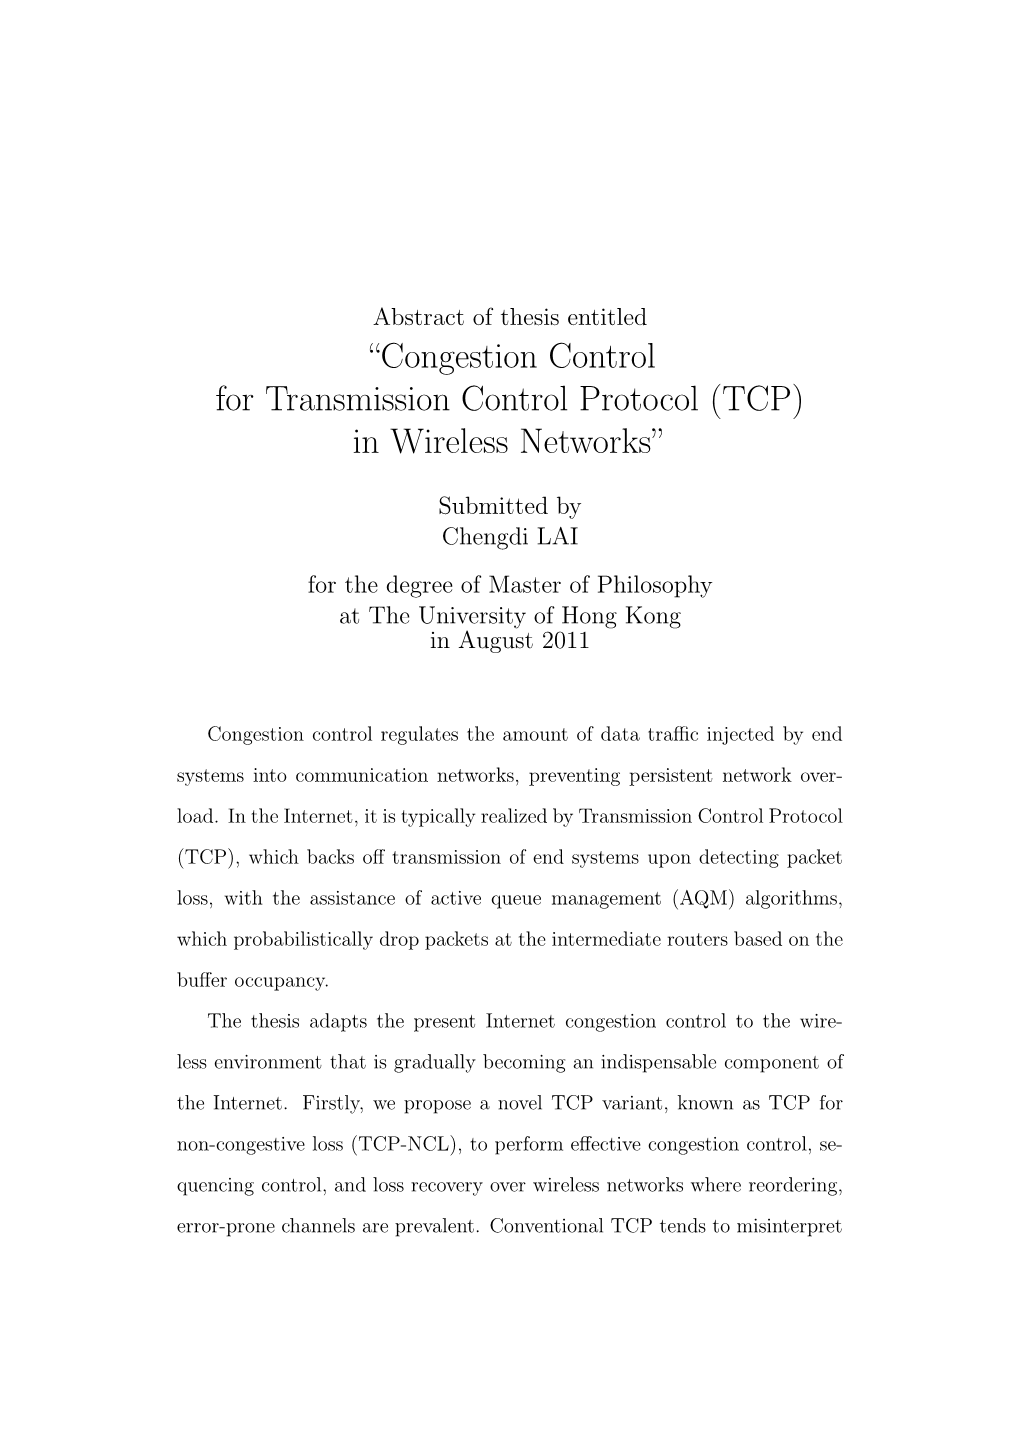 “Congestion Control for Transmission Control Protocol (TCP) in Wireless Networks”